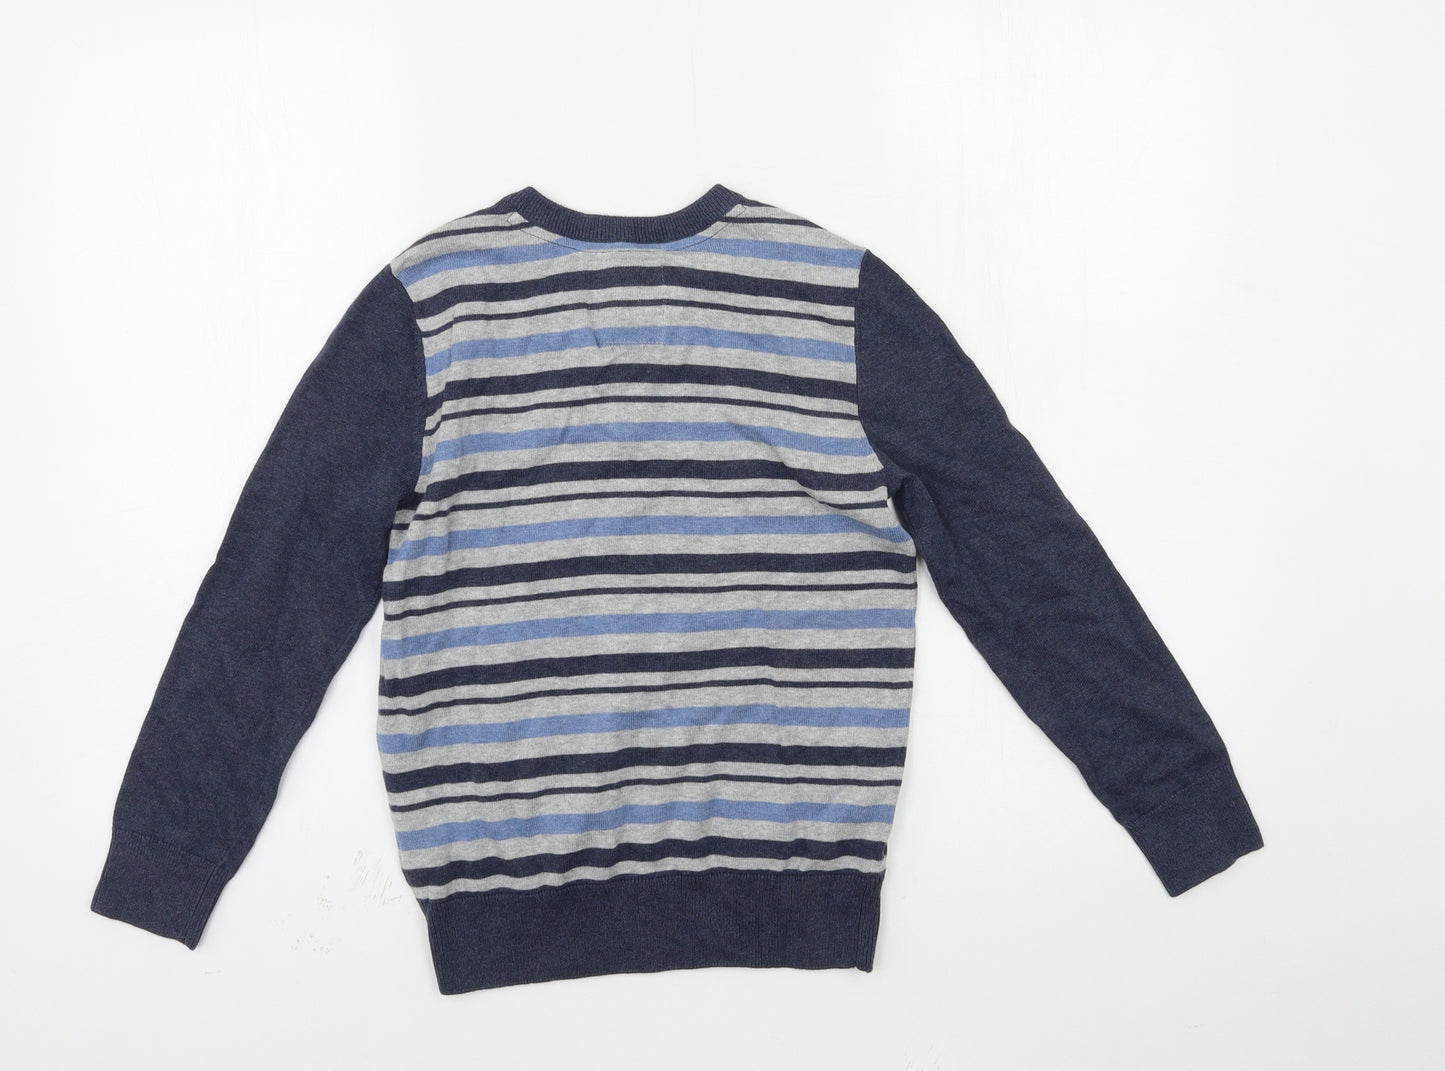 Matalan Boys Blue Striped Knit Pullover Jumper Size 9 Years